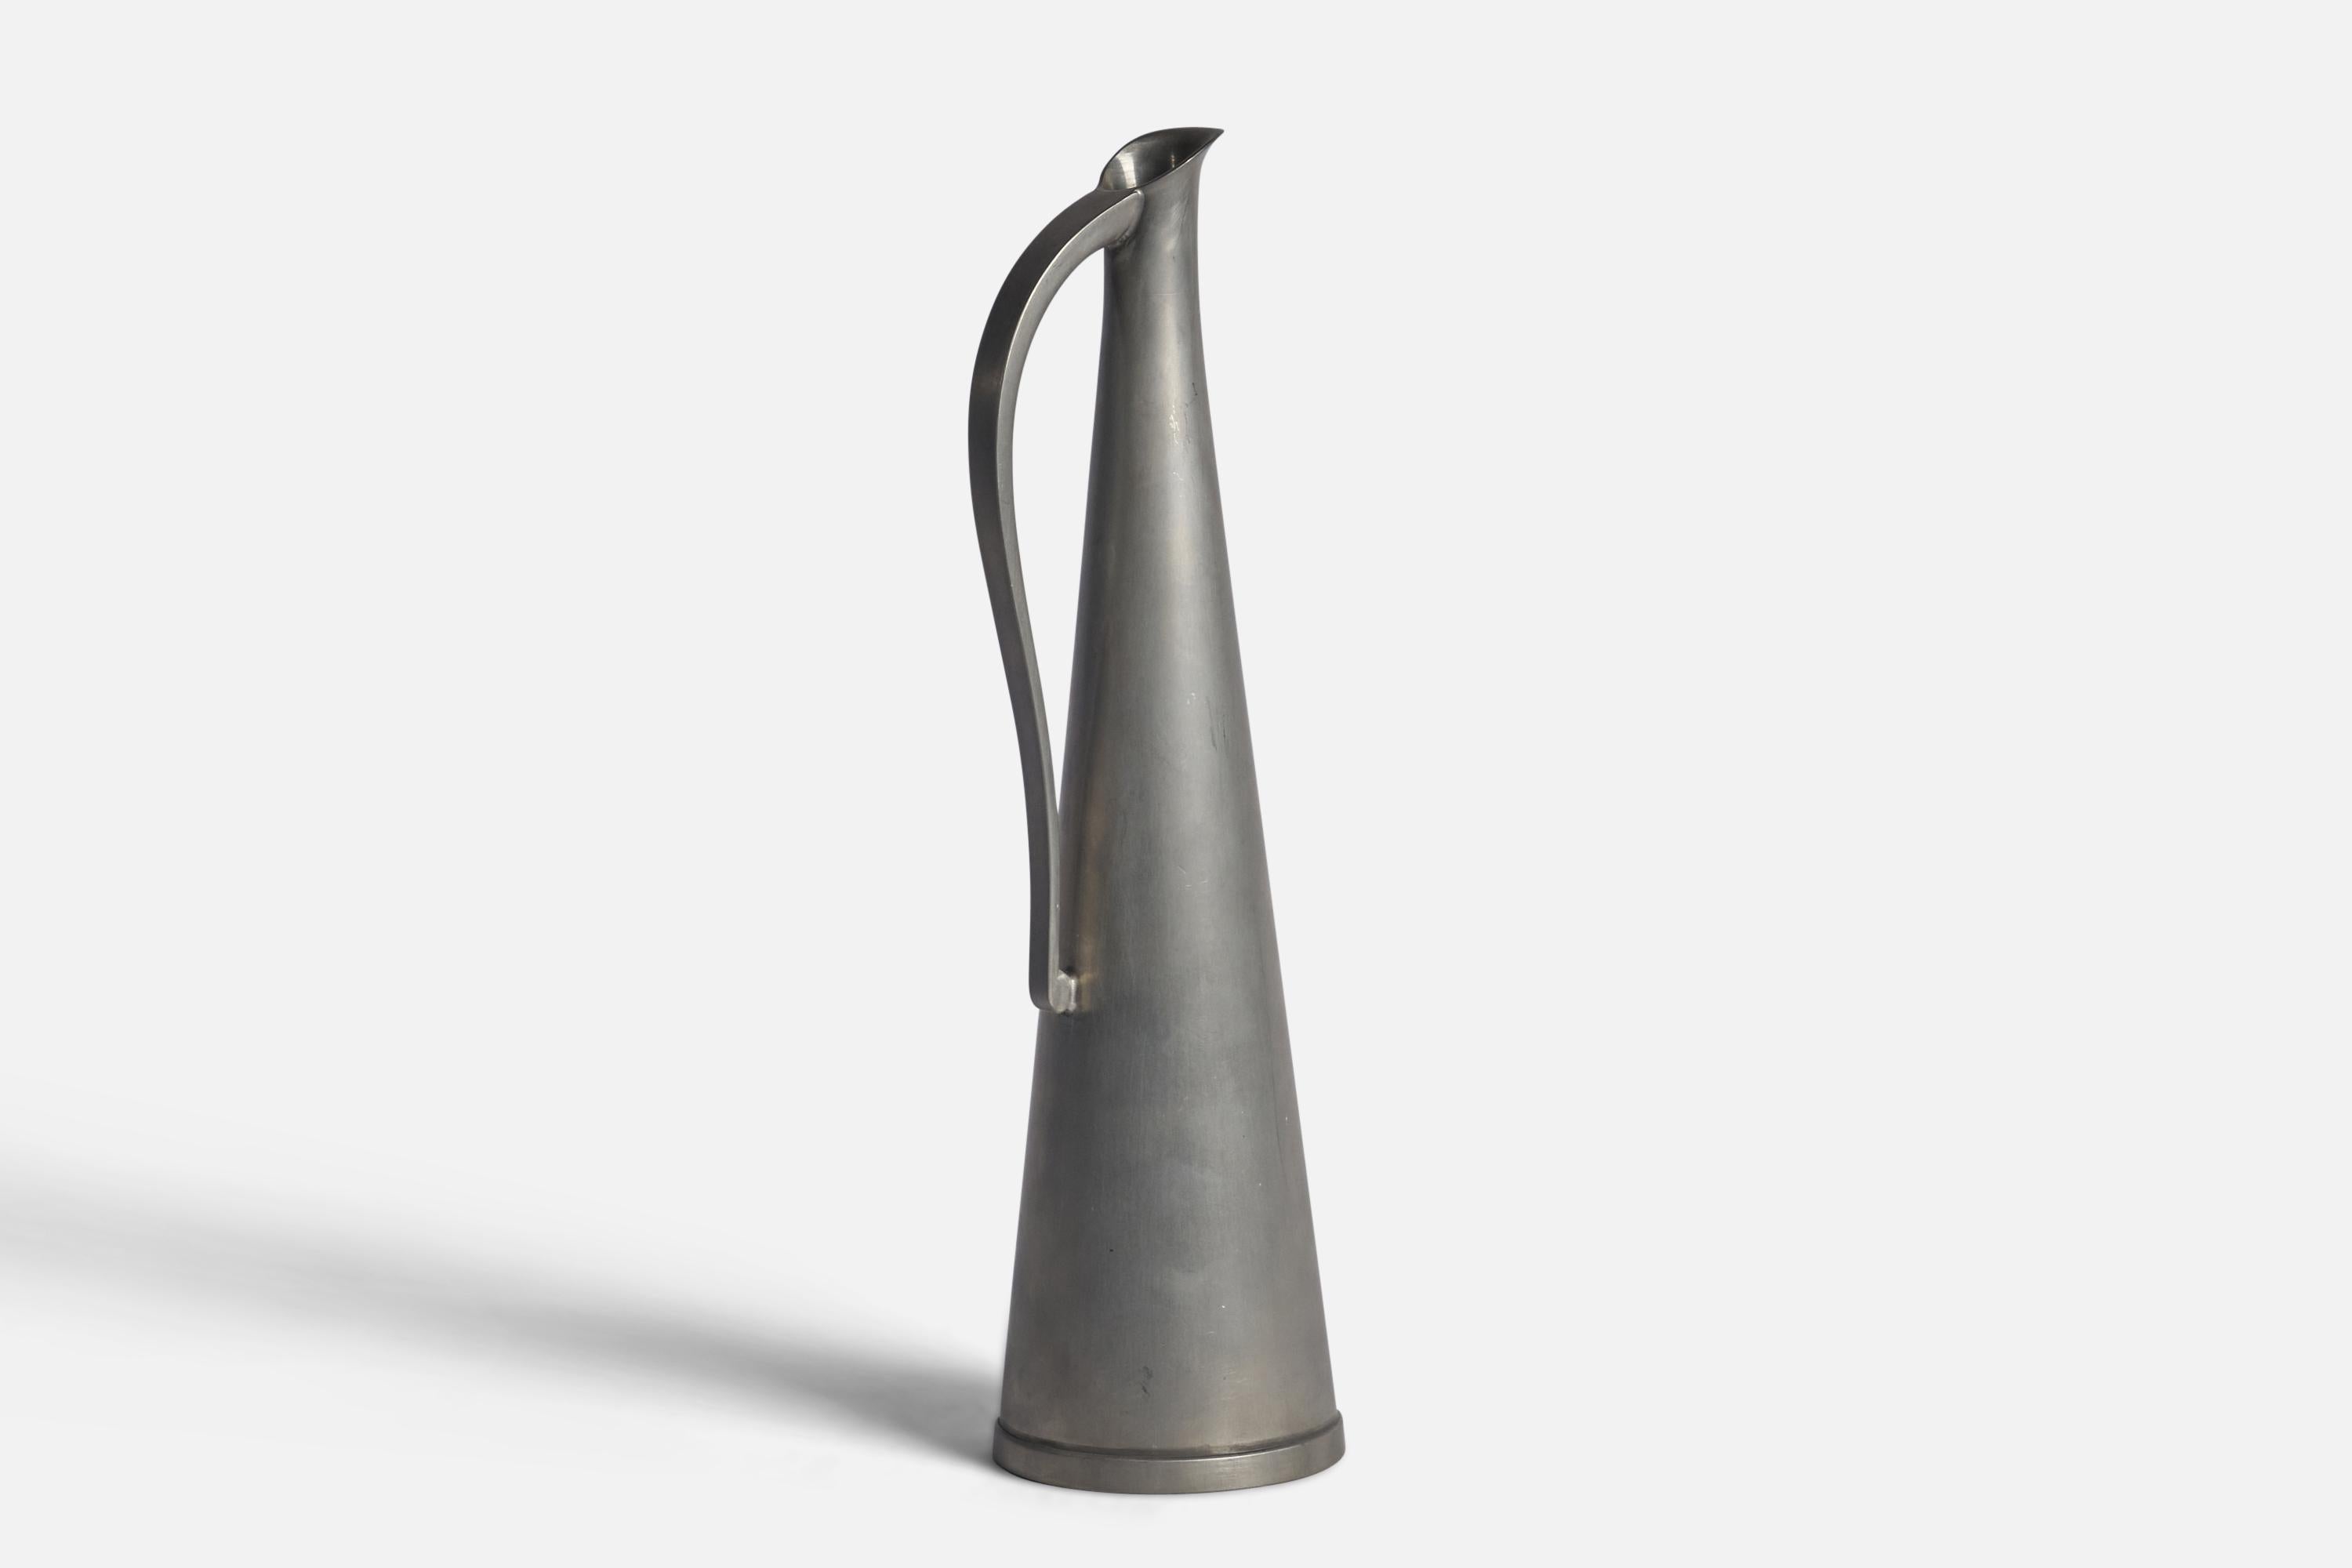 A pewter pitcher designed and produced by Gunnar Havstad, Norway, 1950s.
“Havstad 93% T” on bottom